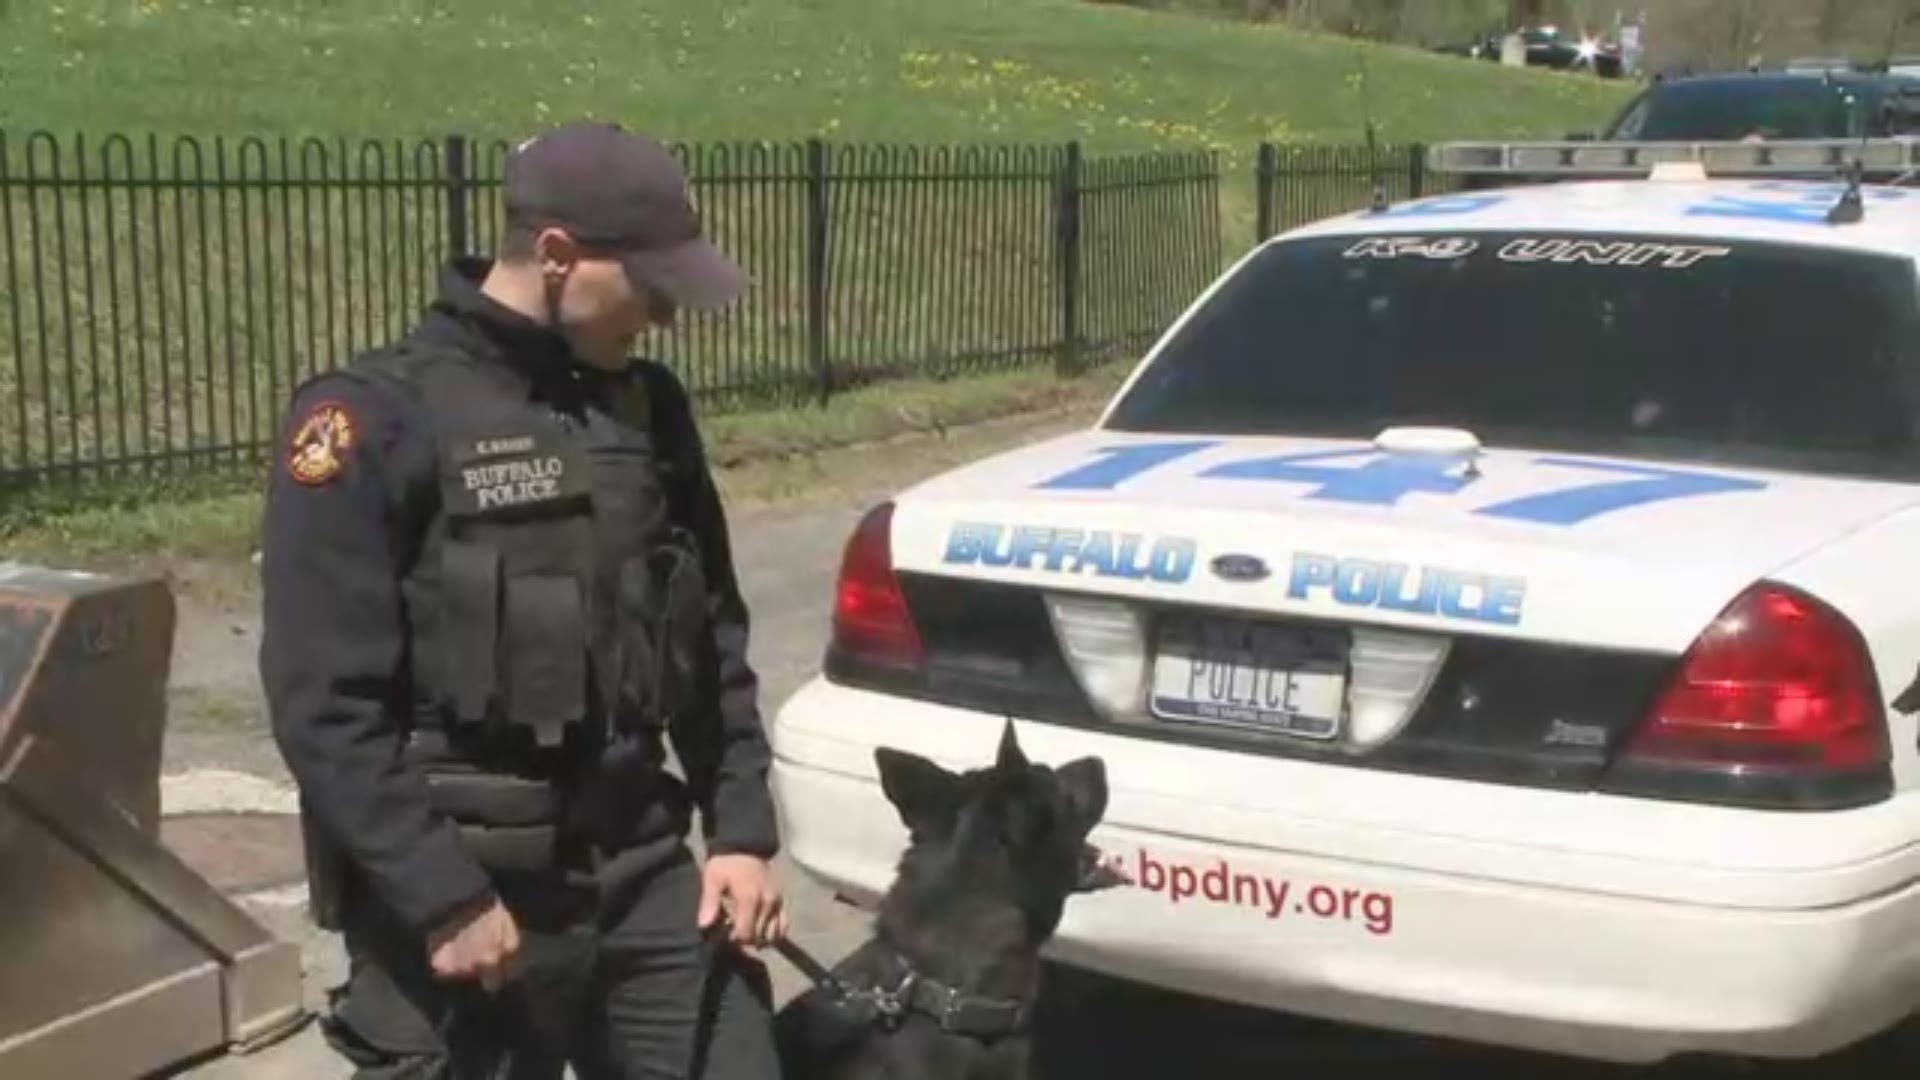 Thanks to the funds from the "Ruffalo Stampede" at the Buffalo Marathon, the Buffalo Police Department has a new K9 officer.  Go behind the scenes to see what it takes to train a dog for the Bomb Squad.